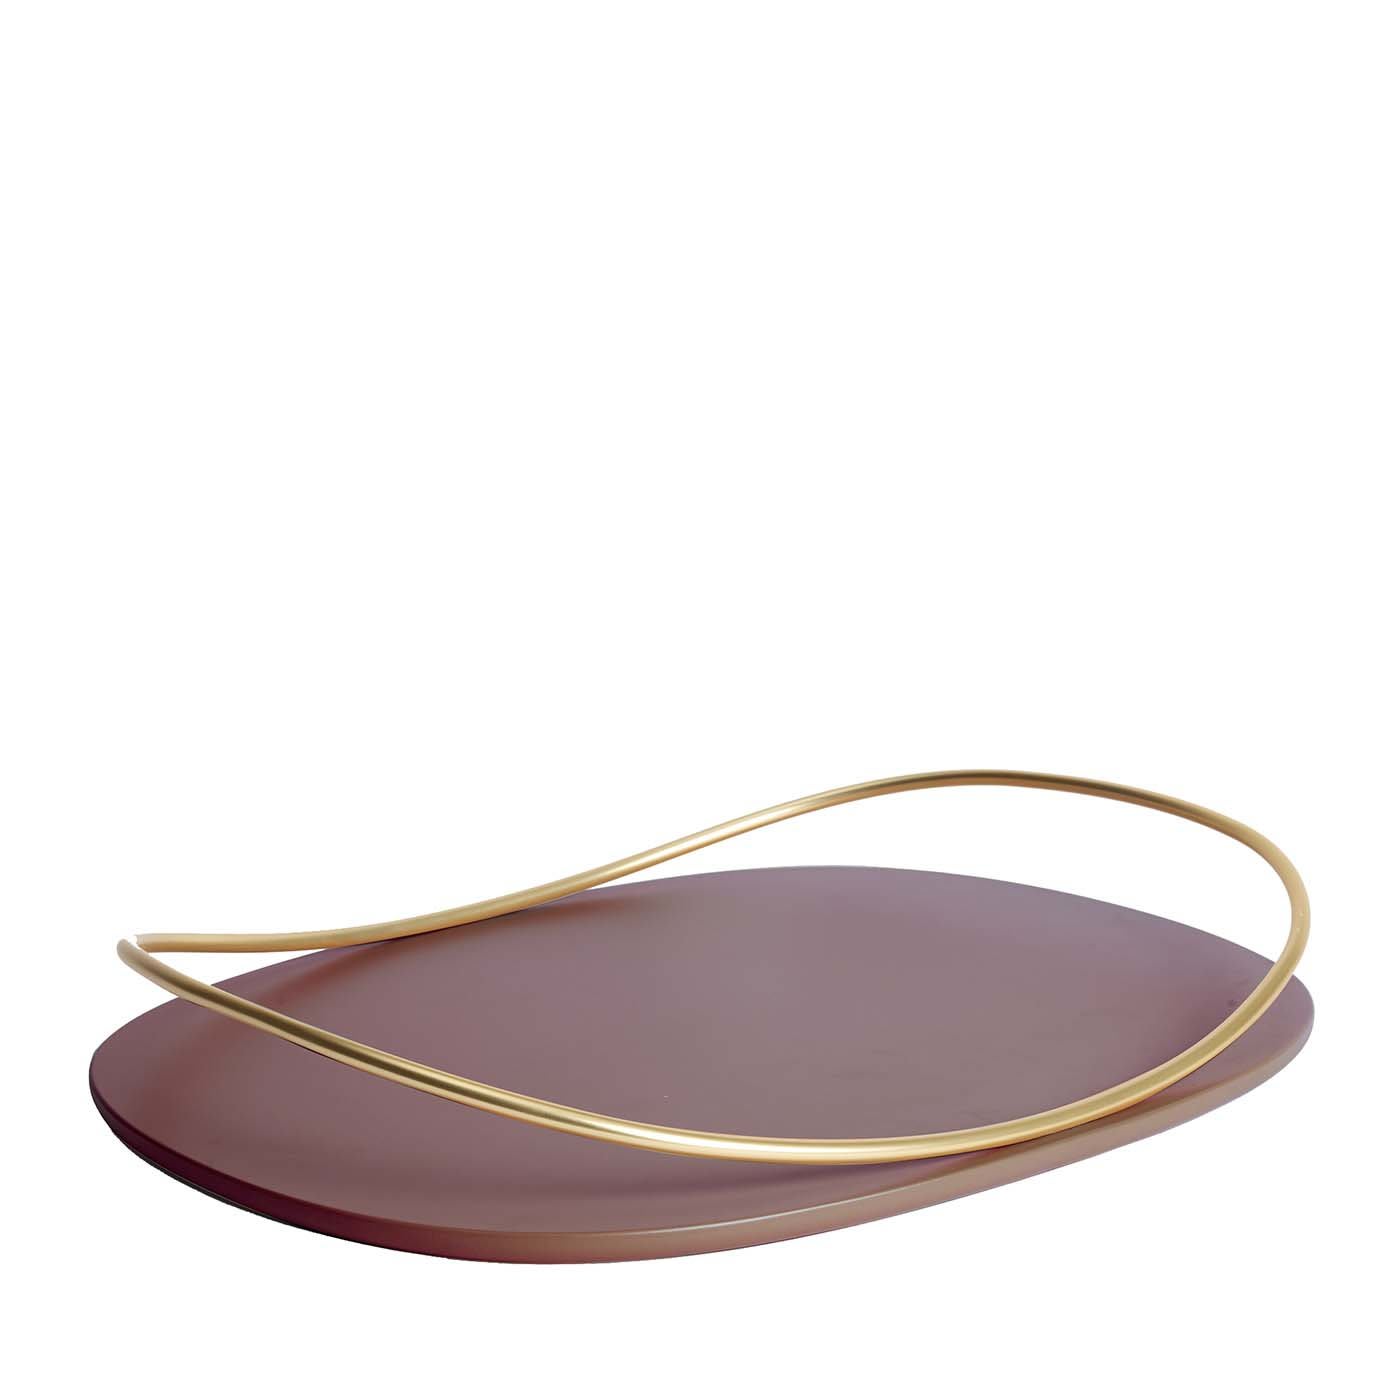 Oval Touchè C Tray in Burgundy - Mason Editions